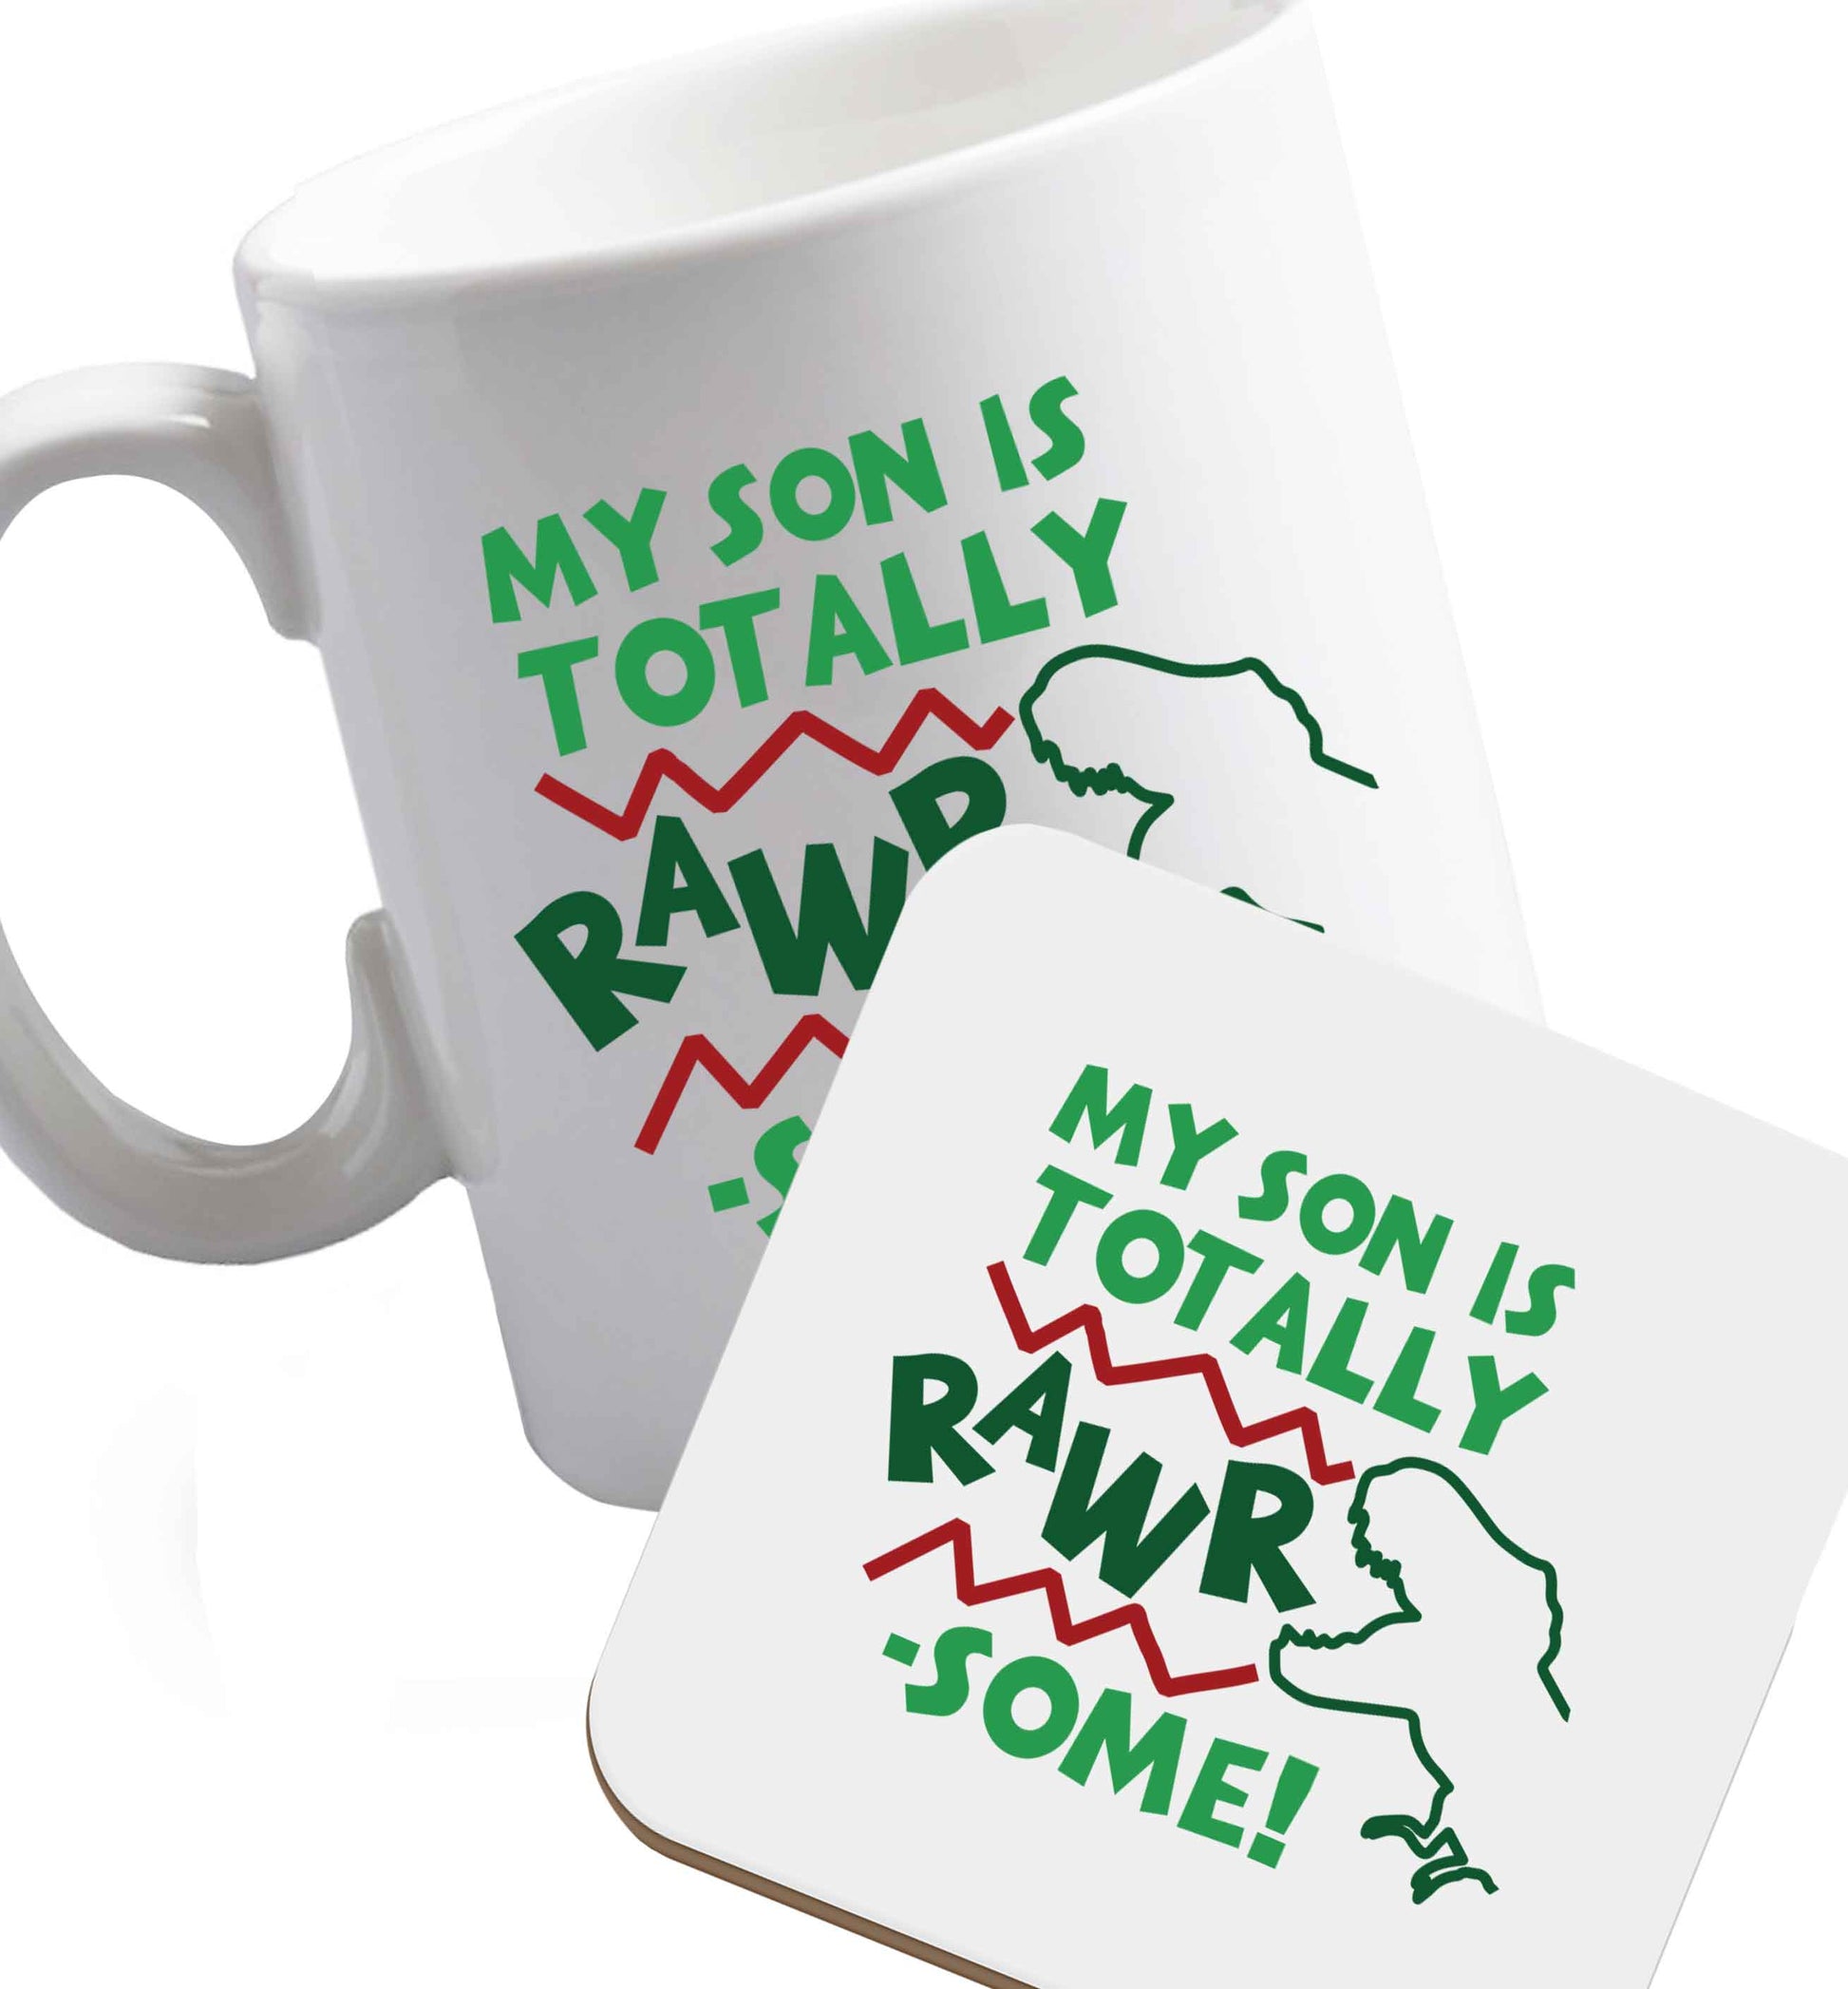 10 oz My son is totally rawrsome ceramic mug and coaster set right handed